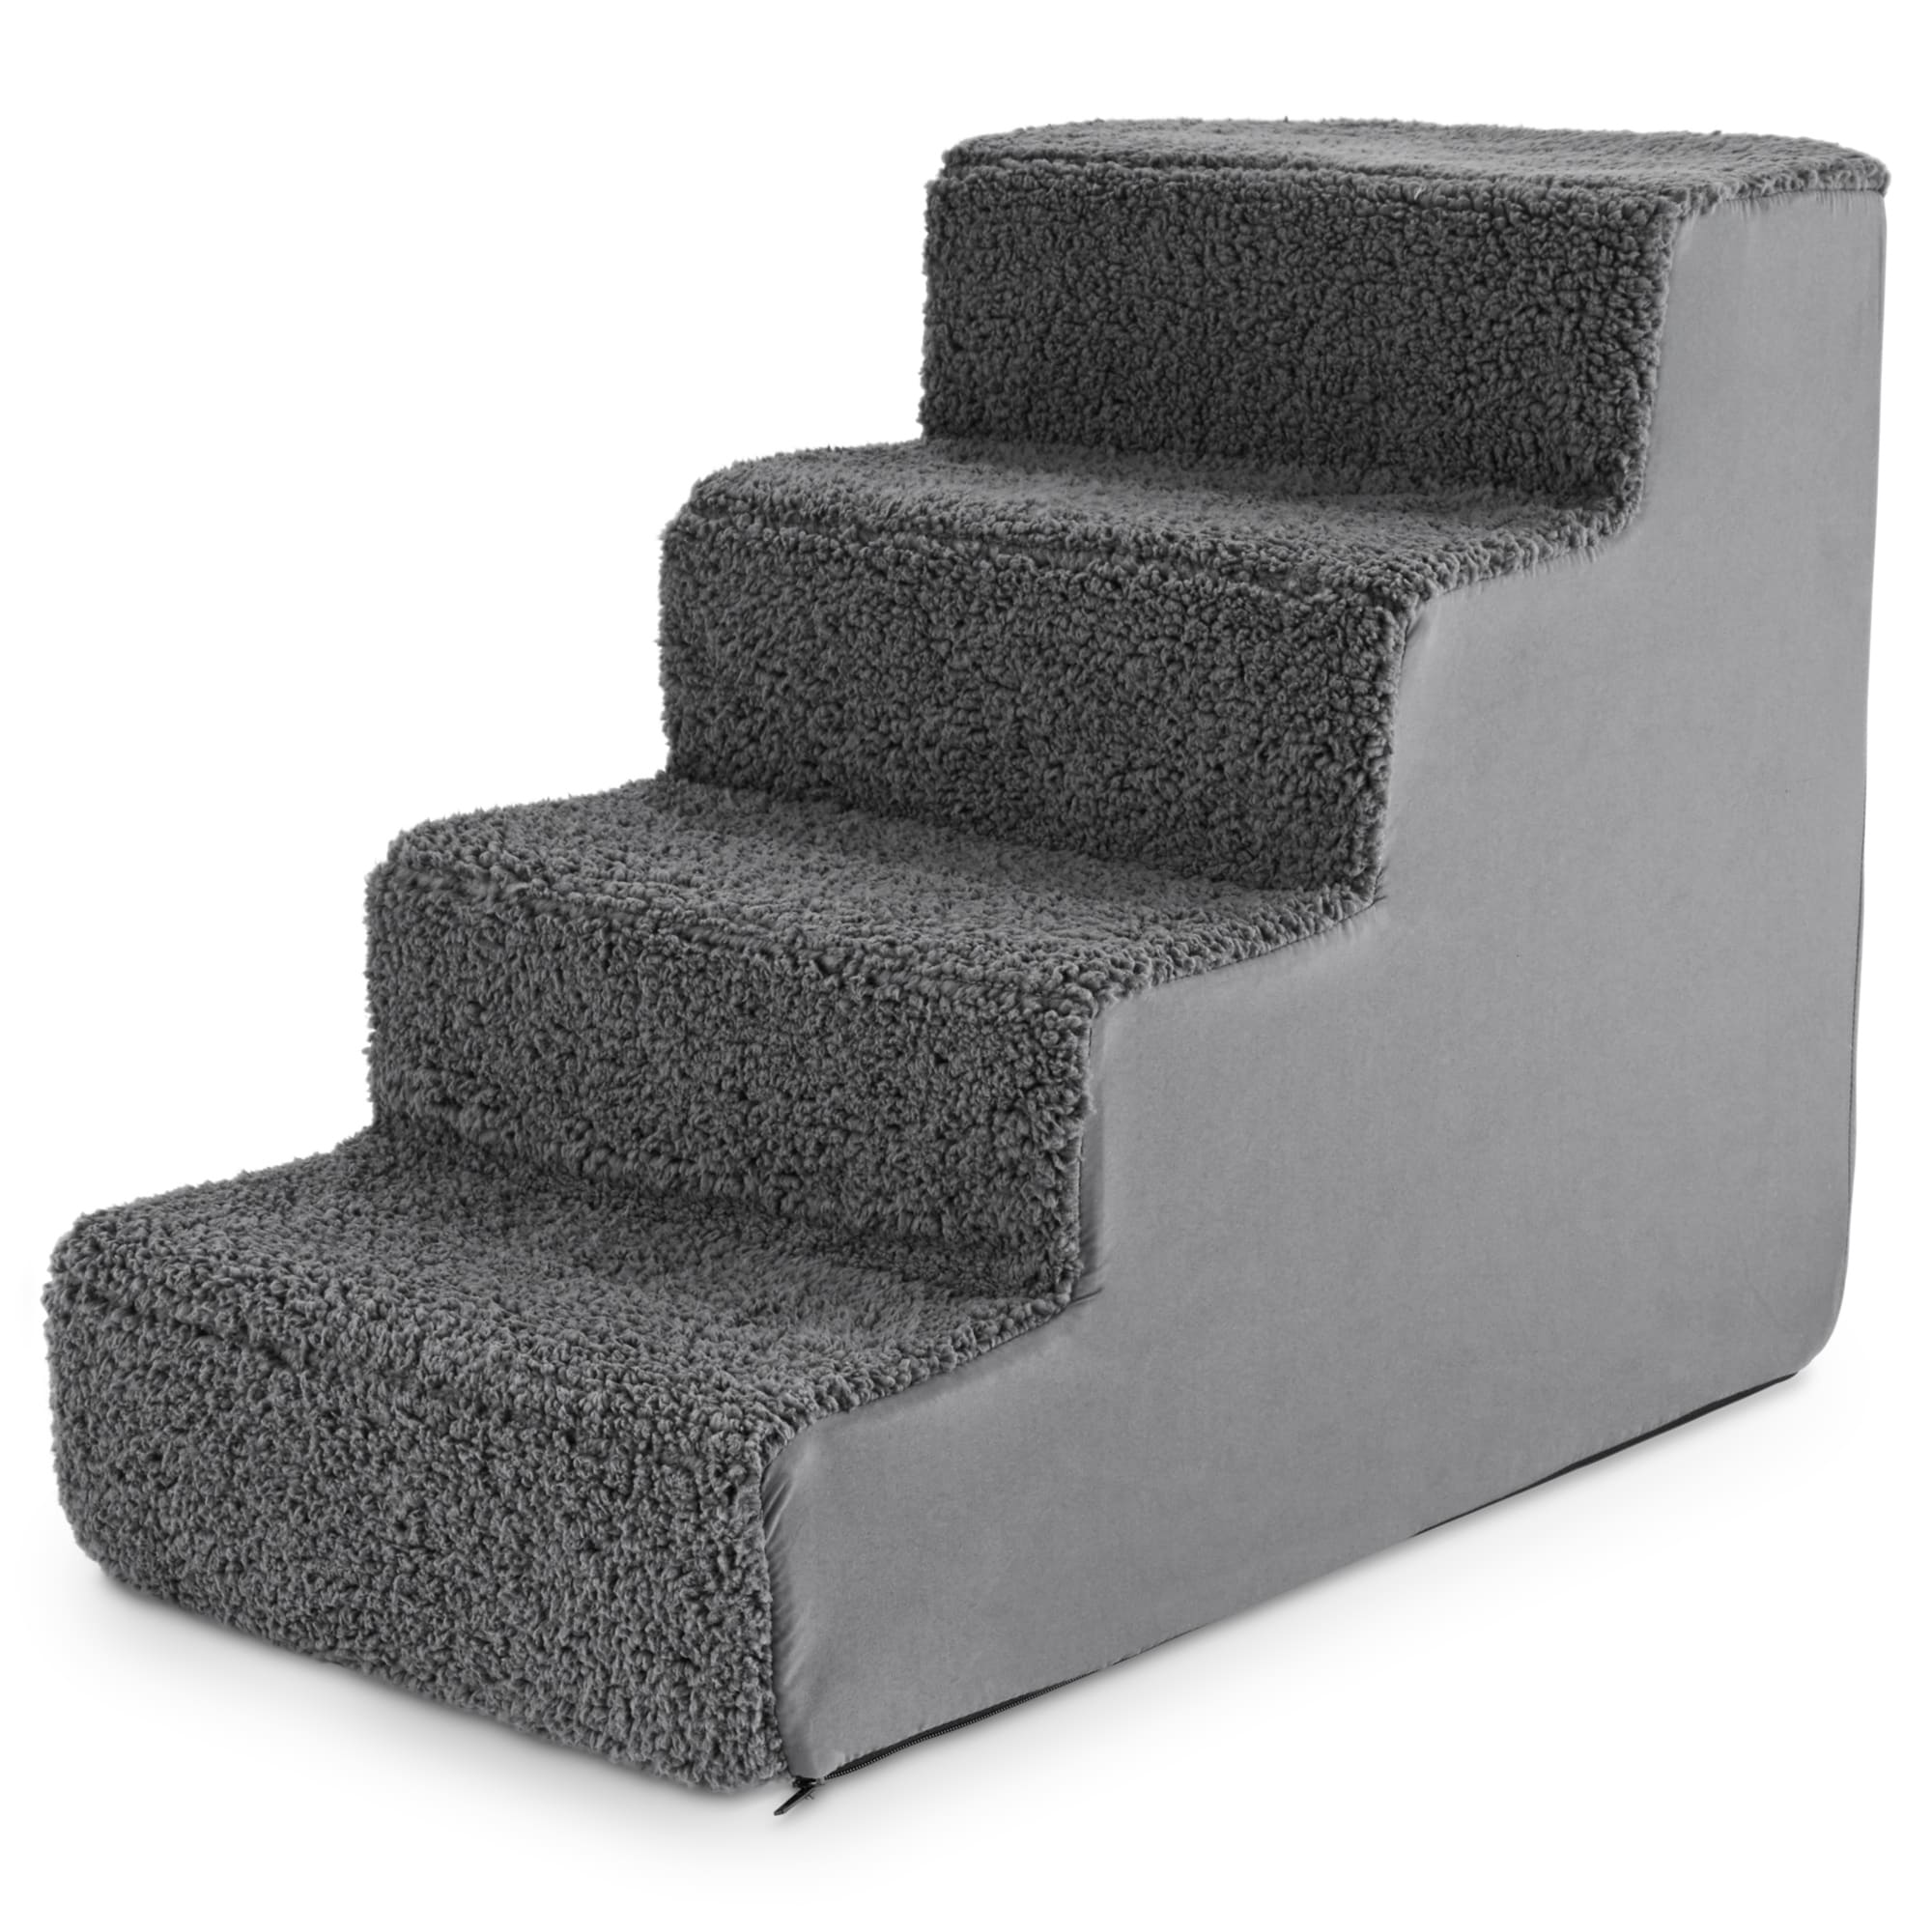 pet stairs